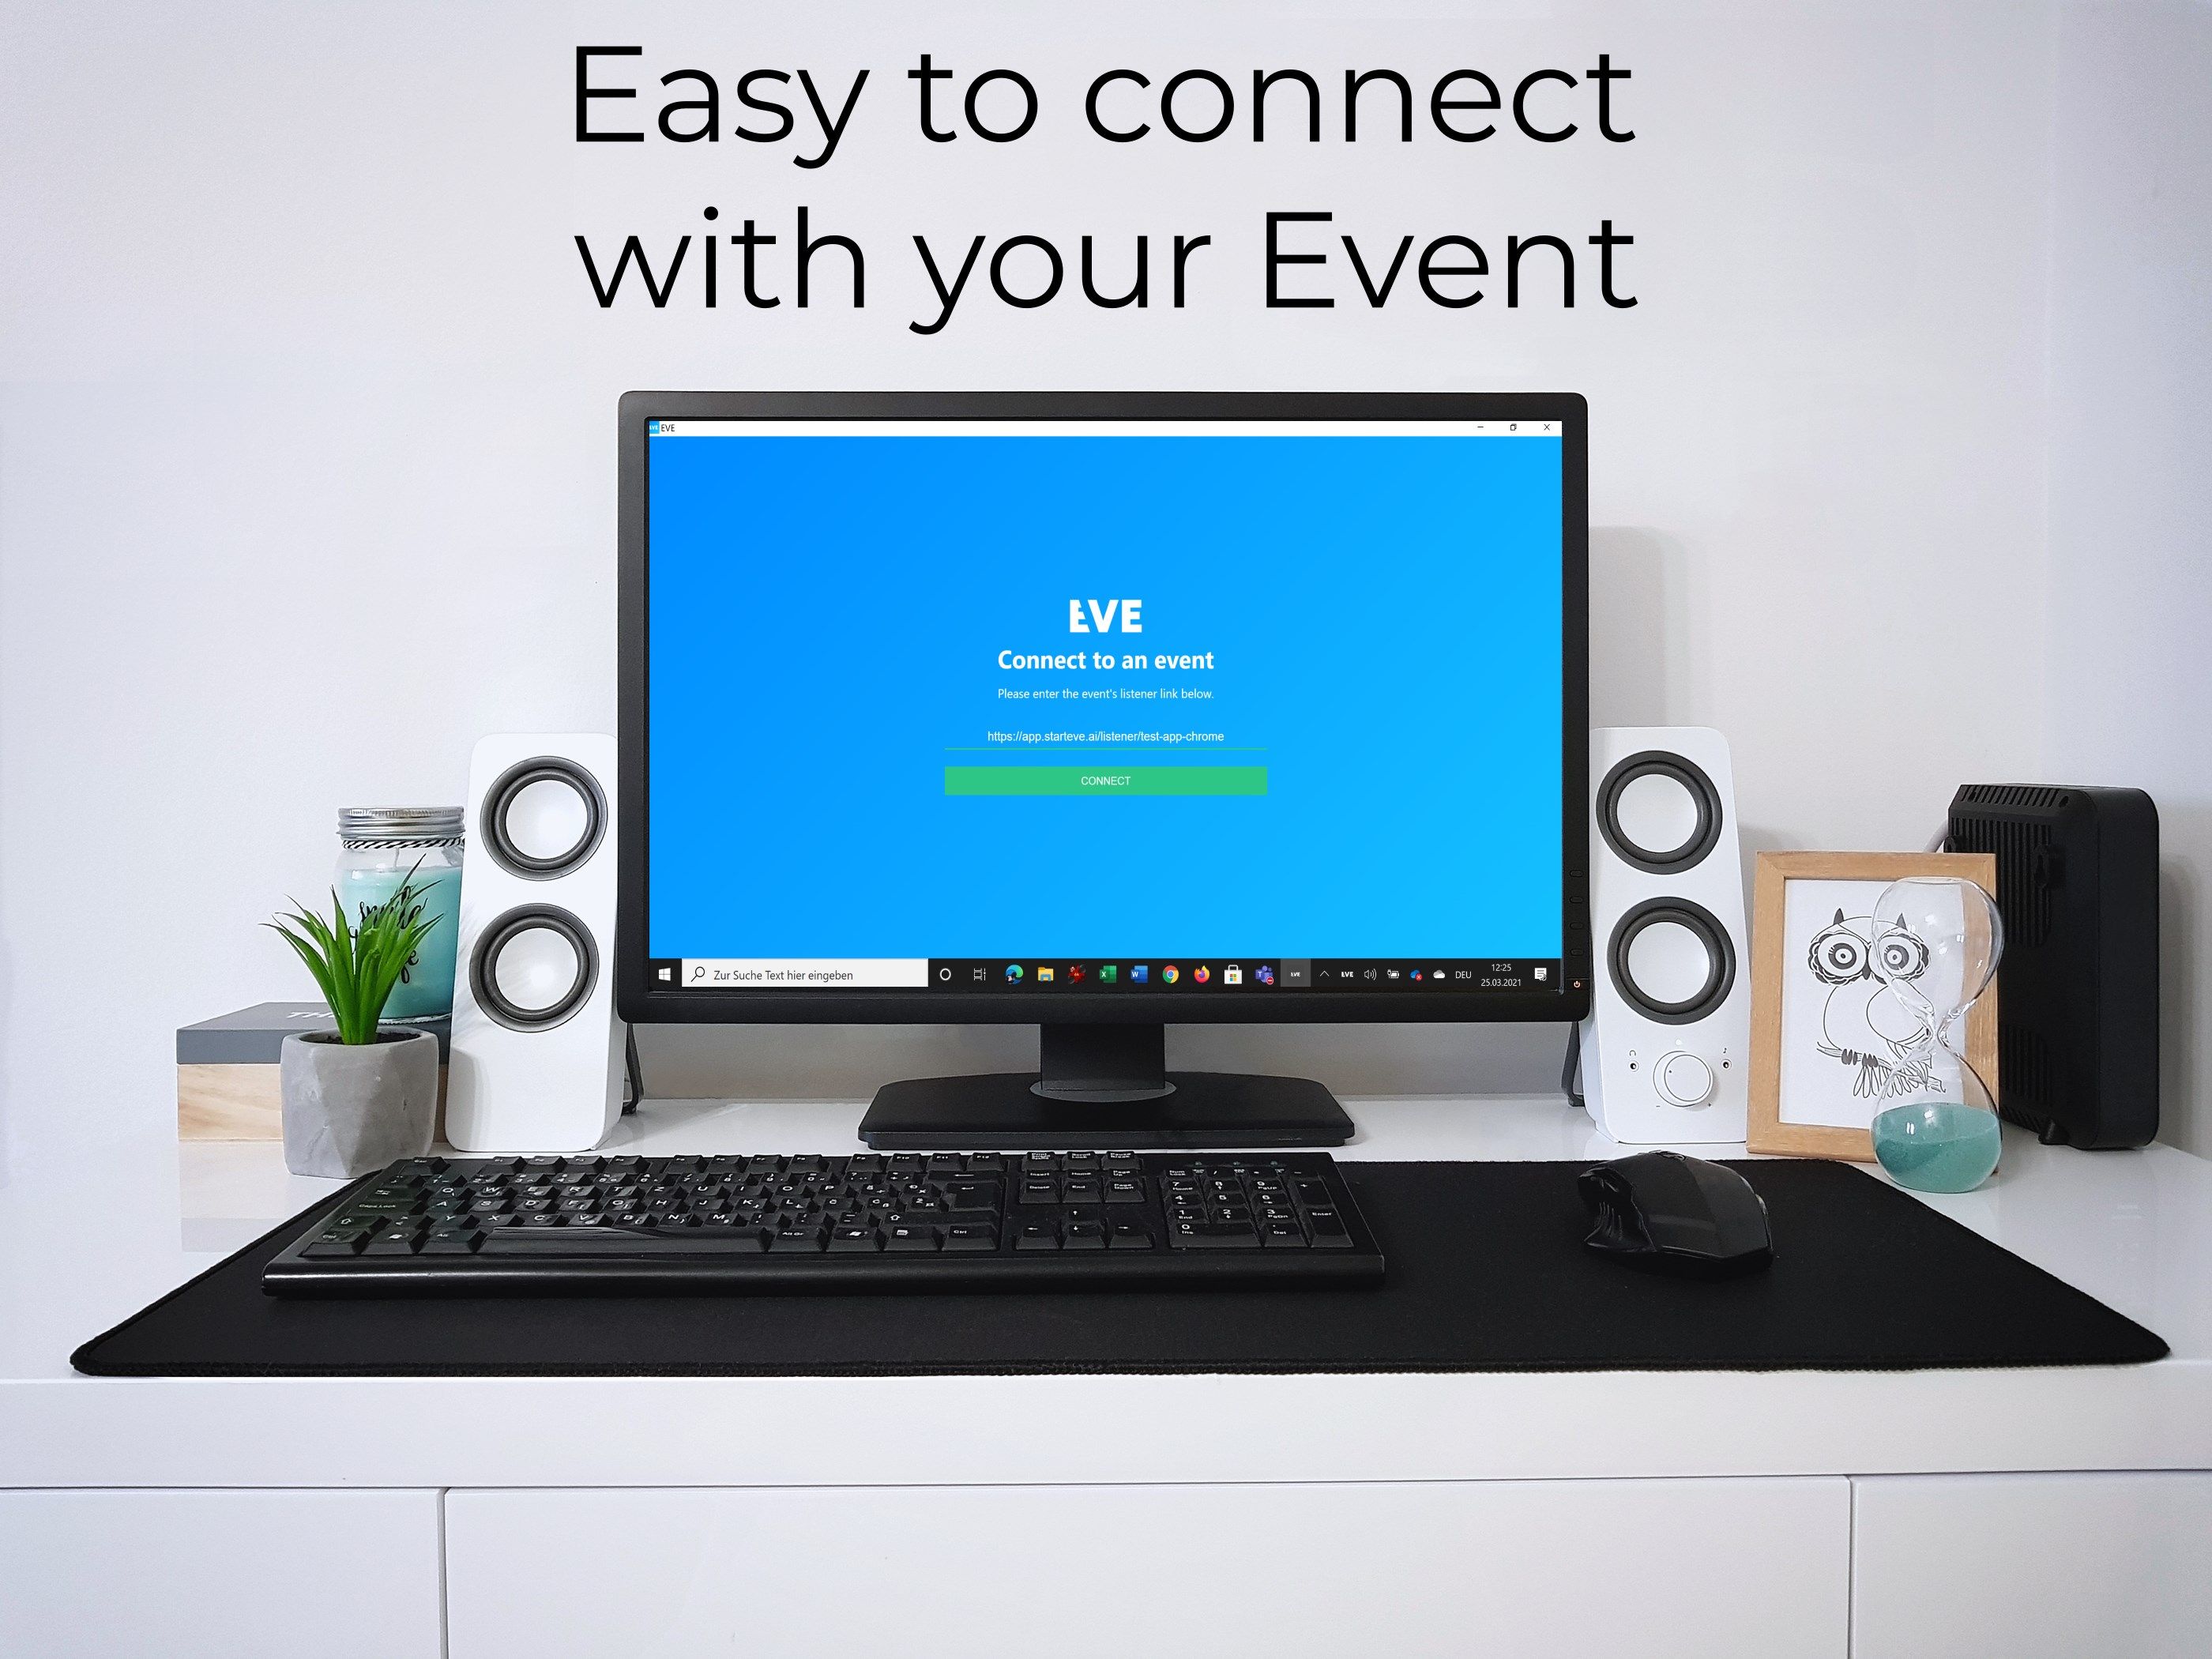 Connect with your EVE event easily